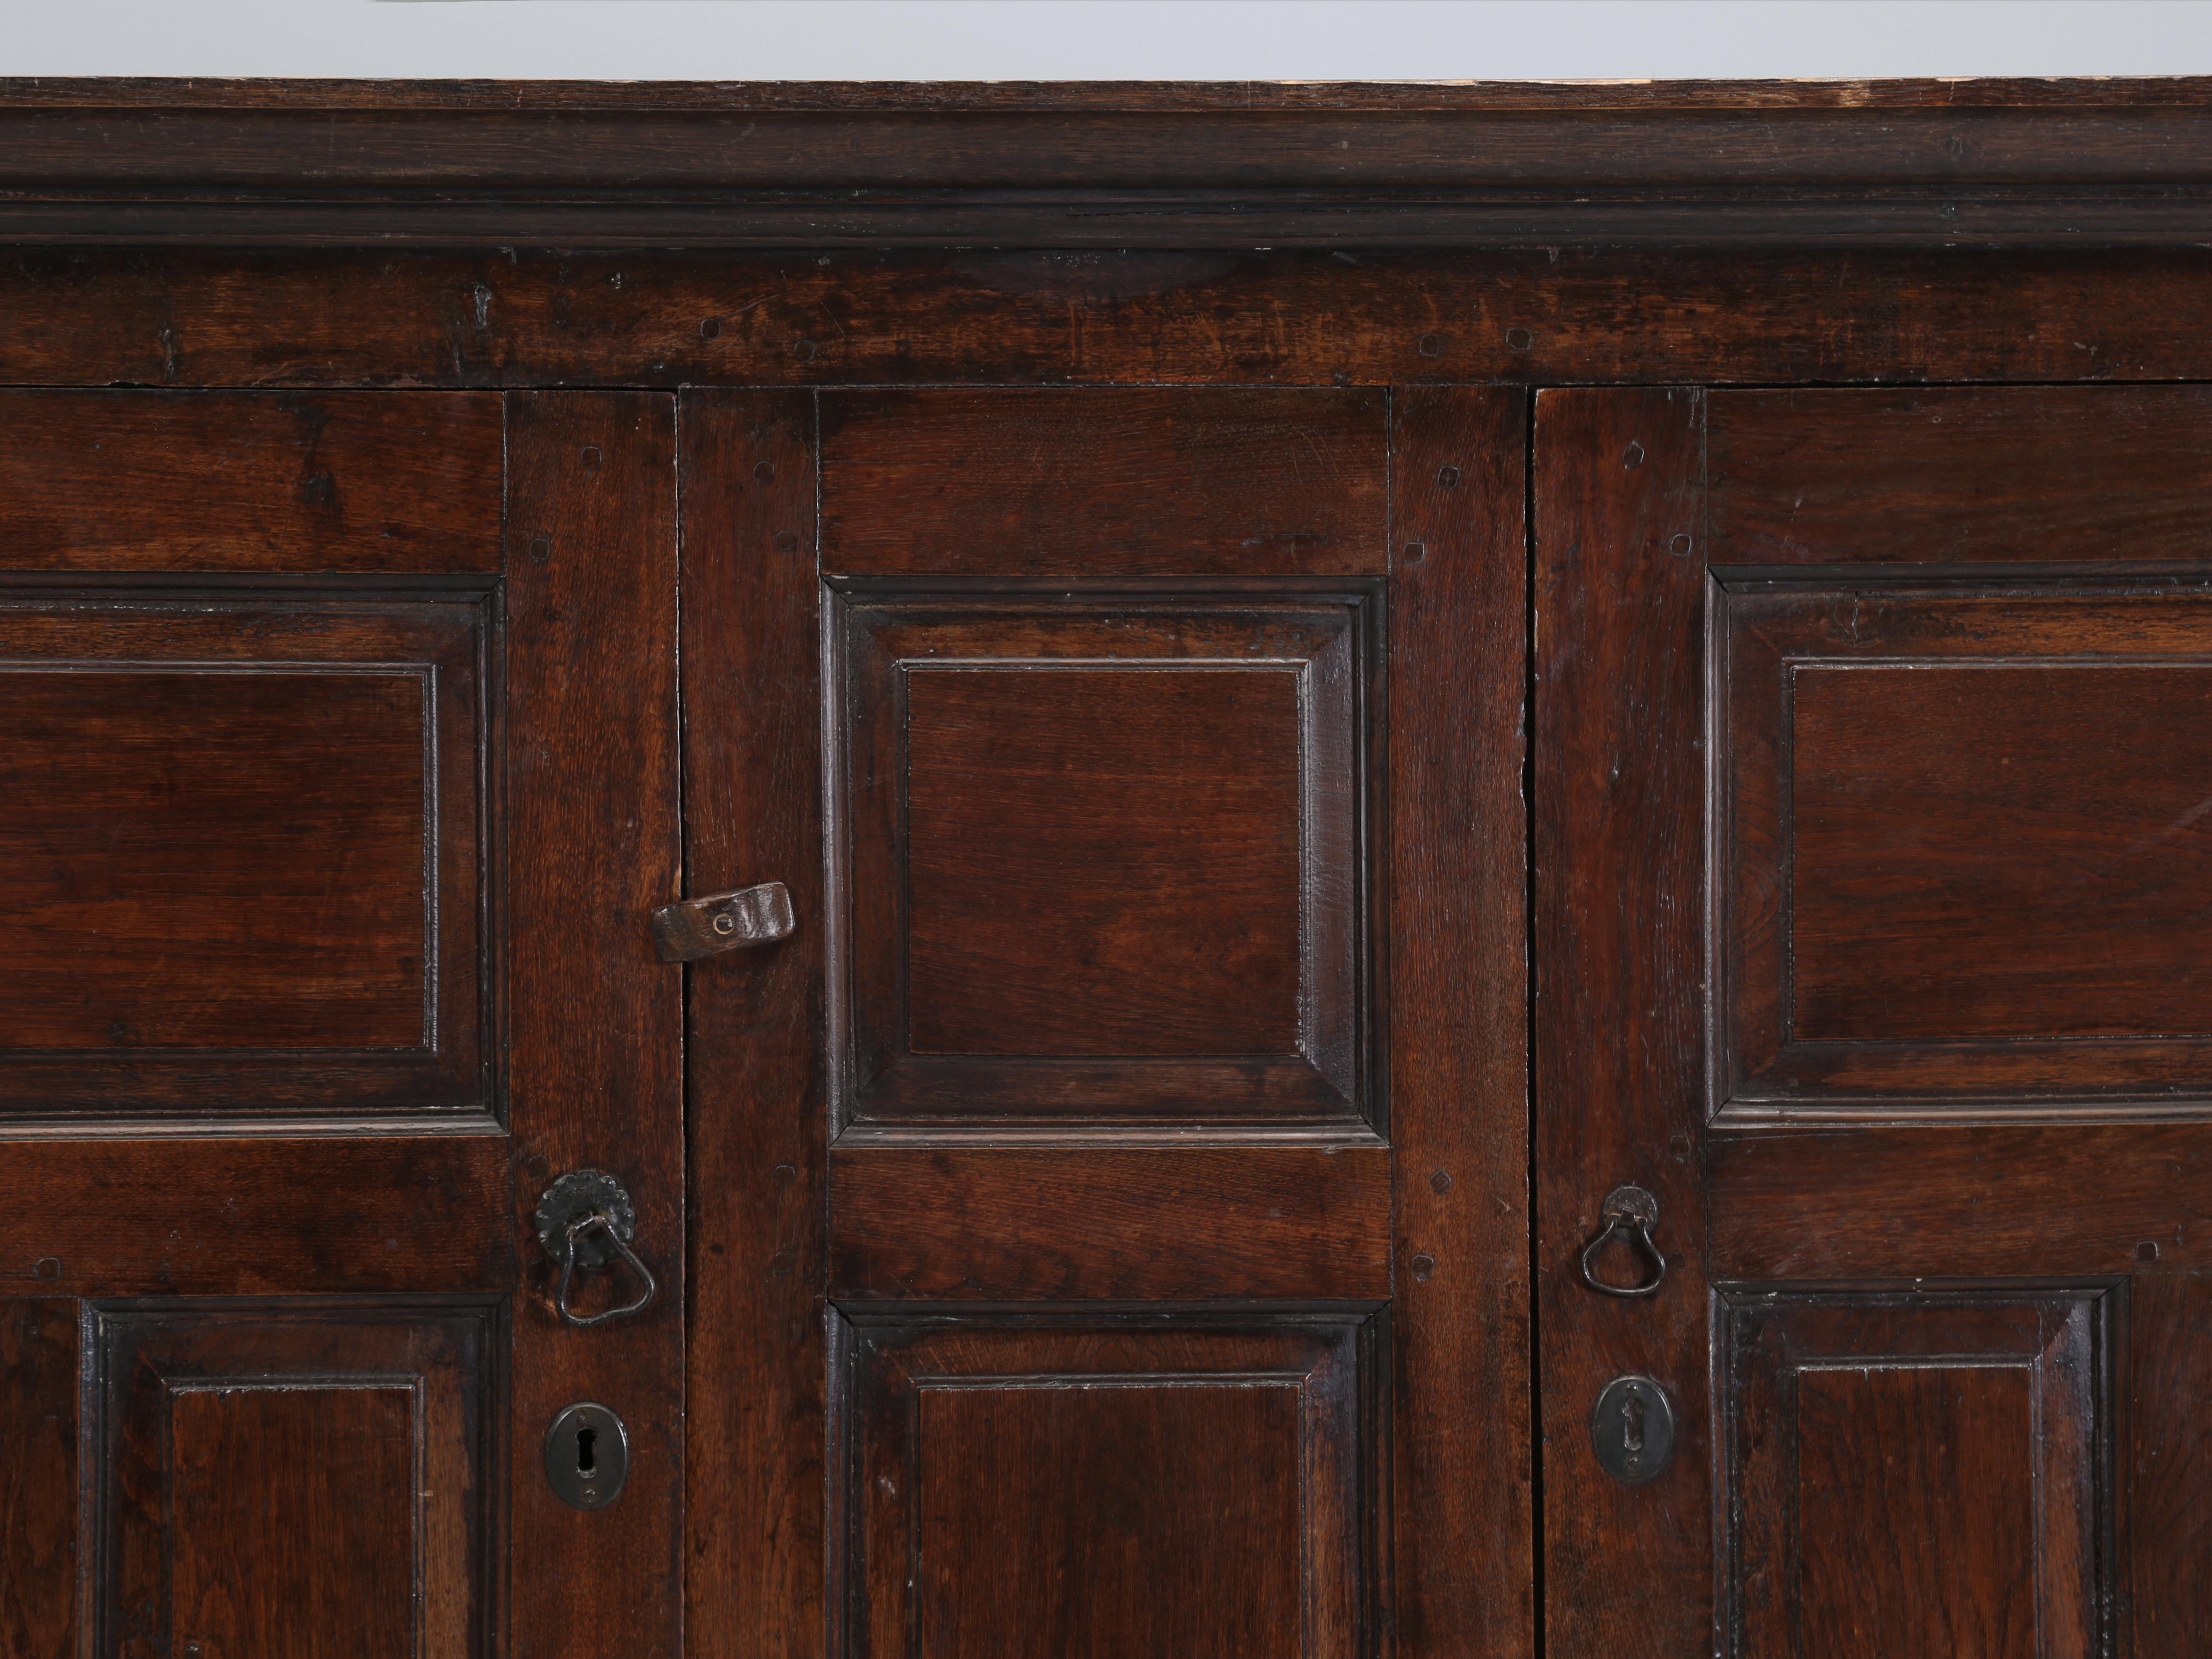 Antique English Oak Baker's Cupboard or Back Hall Coat Closet c1700-40 Original  In Good Condition For Sale In Chicago, IL